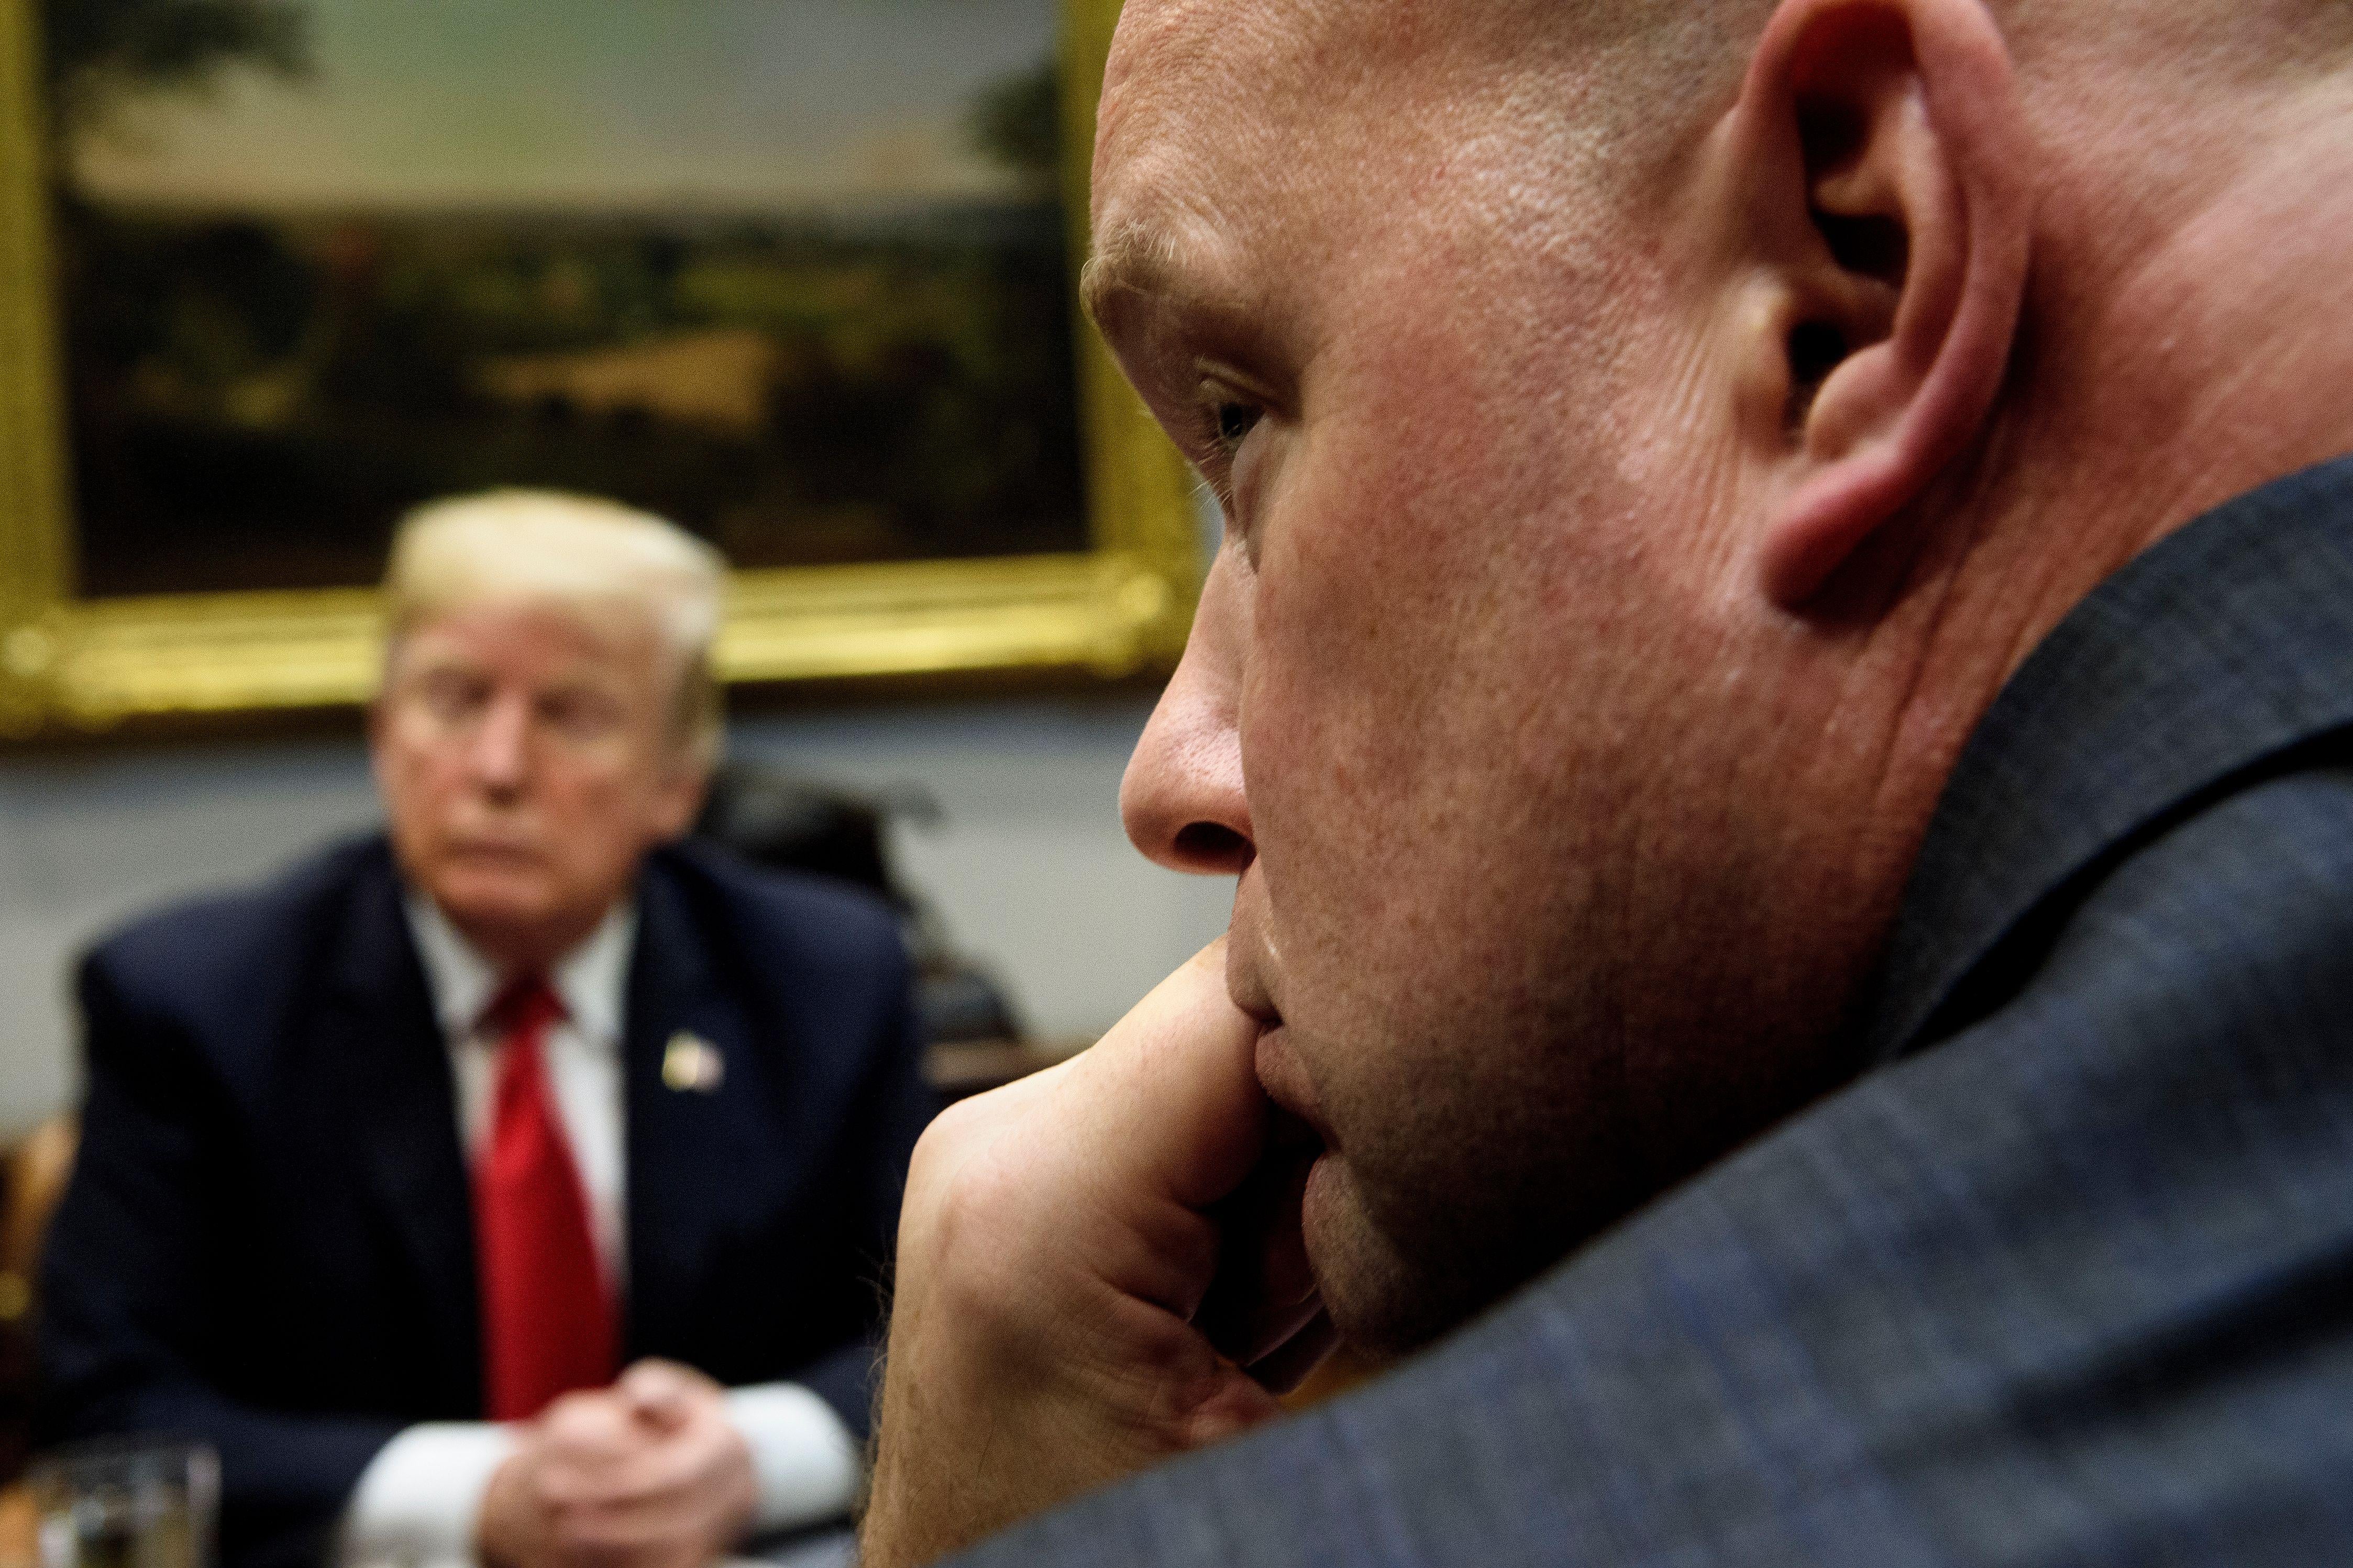 President Donald Trump and acting Attorney General Matthew Whitaker listen during a roundtable discussion about school safety in the Roosevelt Room of the the White House on December 18, 2018.